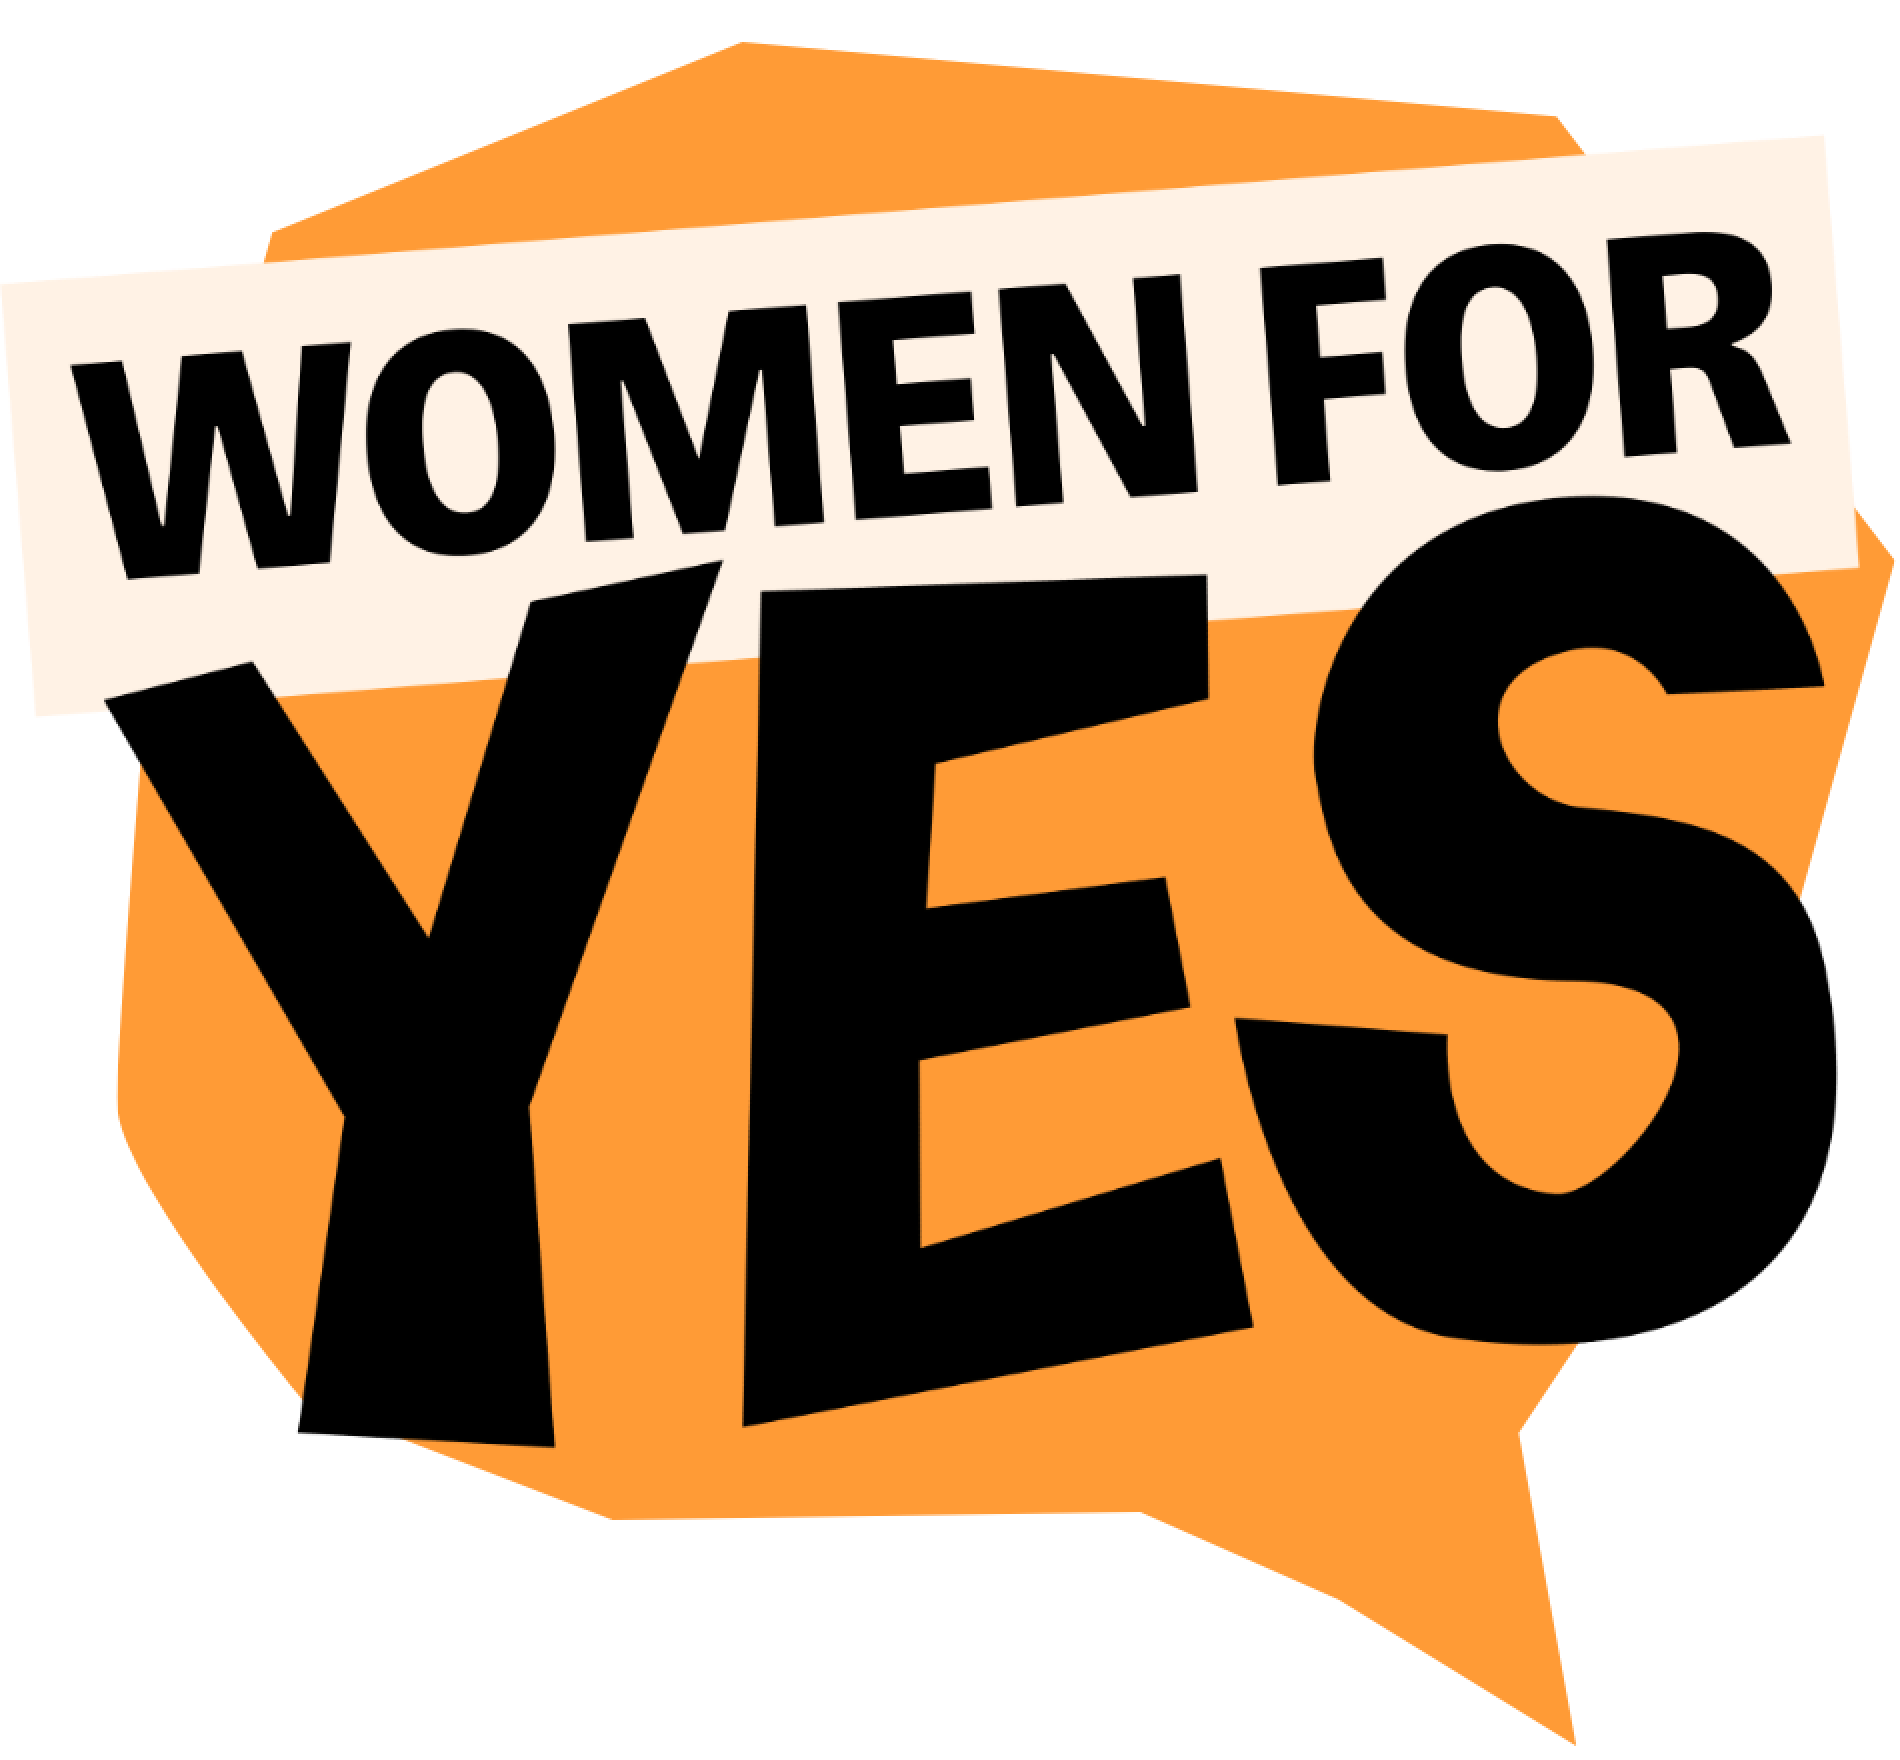 Together, Yes - Women For Yes